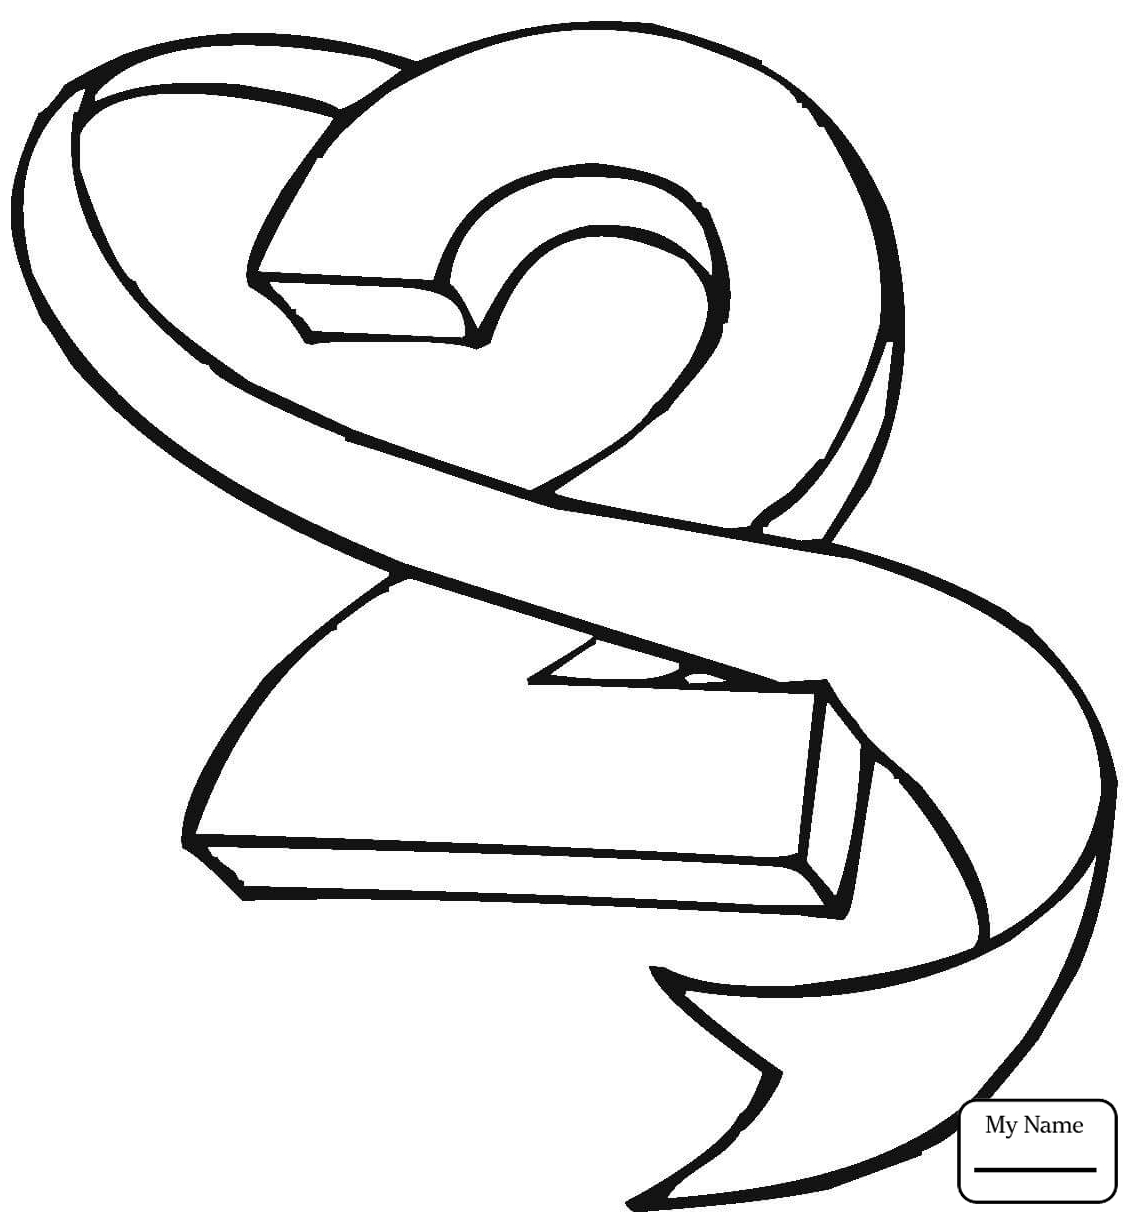 Number 0 Coloring Page | Free download on ClipArtMag